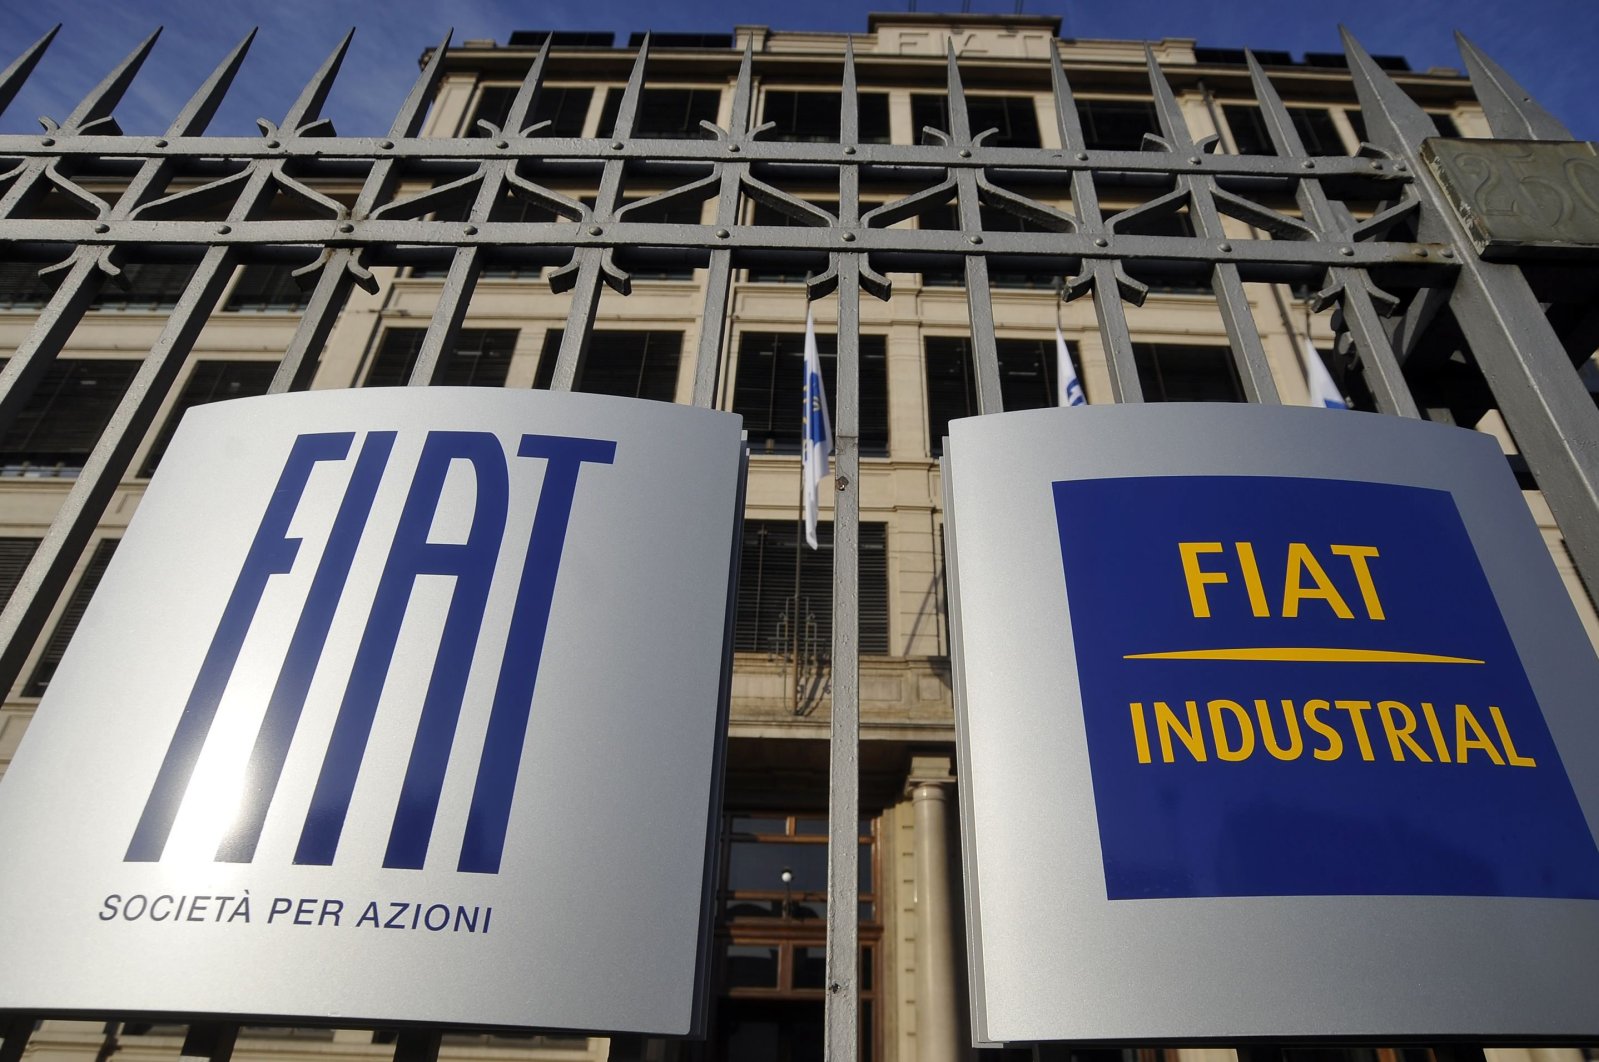 Fiat's logos are seen at the main entrance of the Fiat headquarters in Turin, Italy, Jan. 12, 2011. (Reuters Photo)